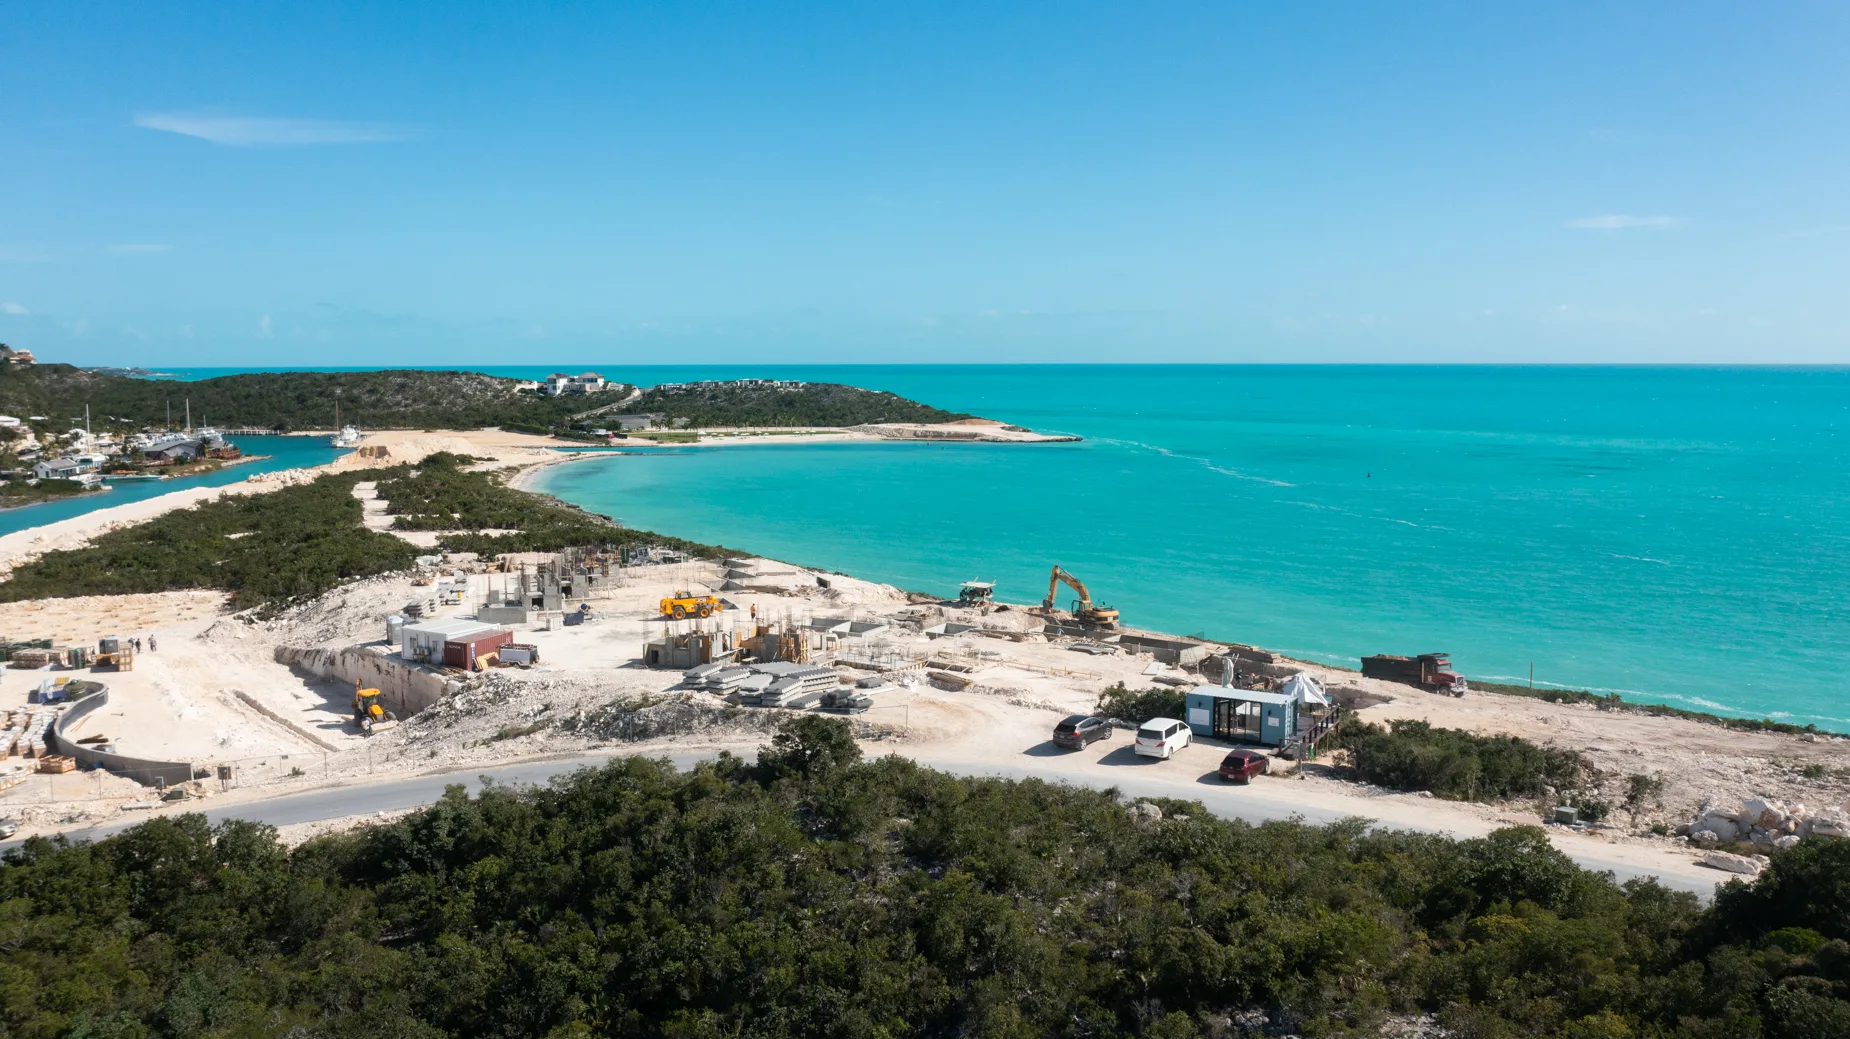 The Strand Cooper Jack Bay Luxury Residences are making excellent progress